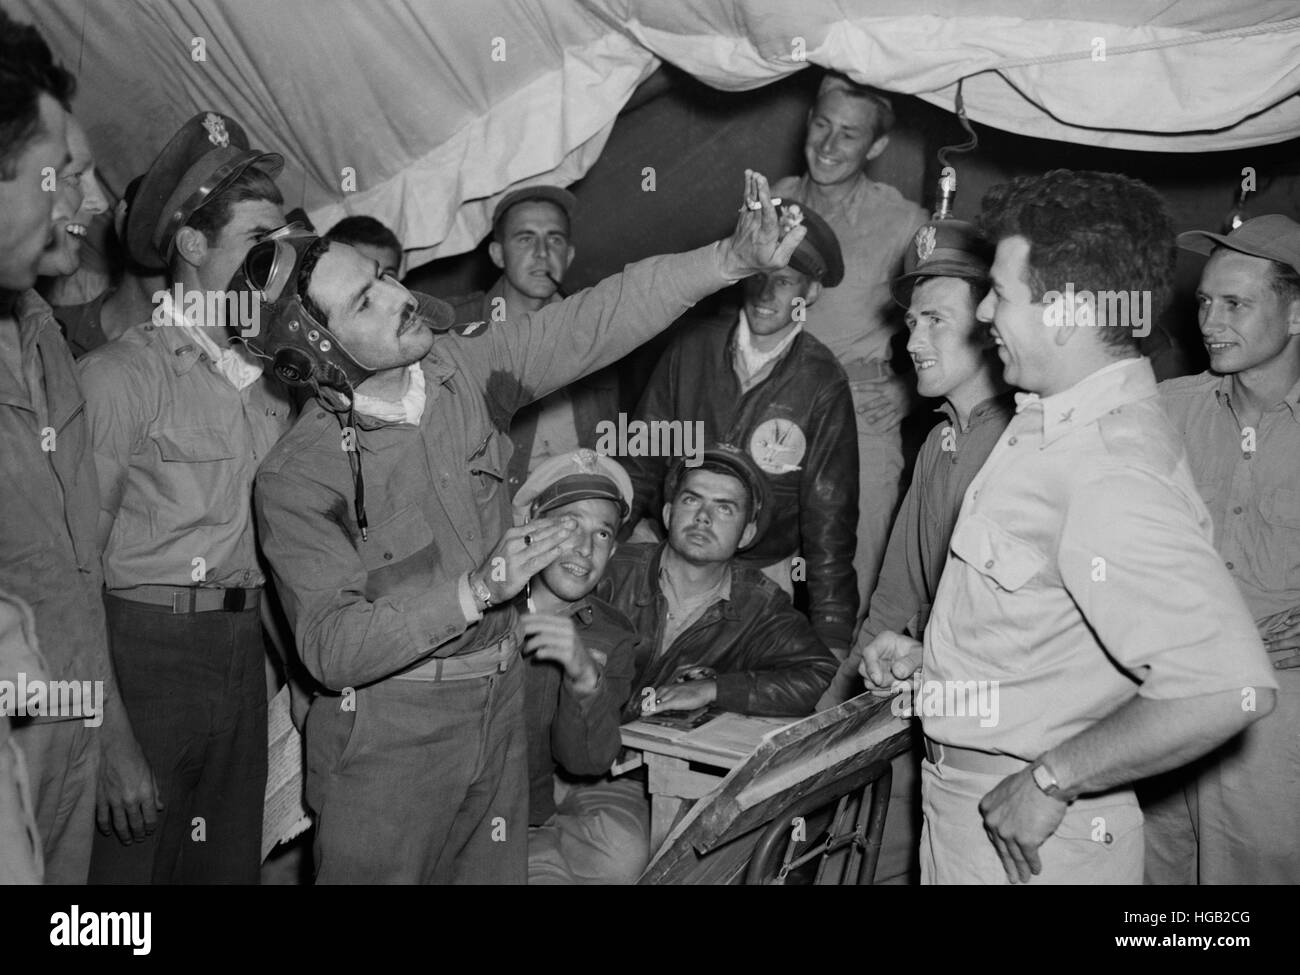 Men of the 314th squadron telling events from a recent World War II air battle, 1943. Stock Photo